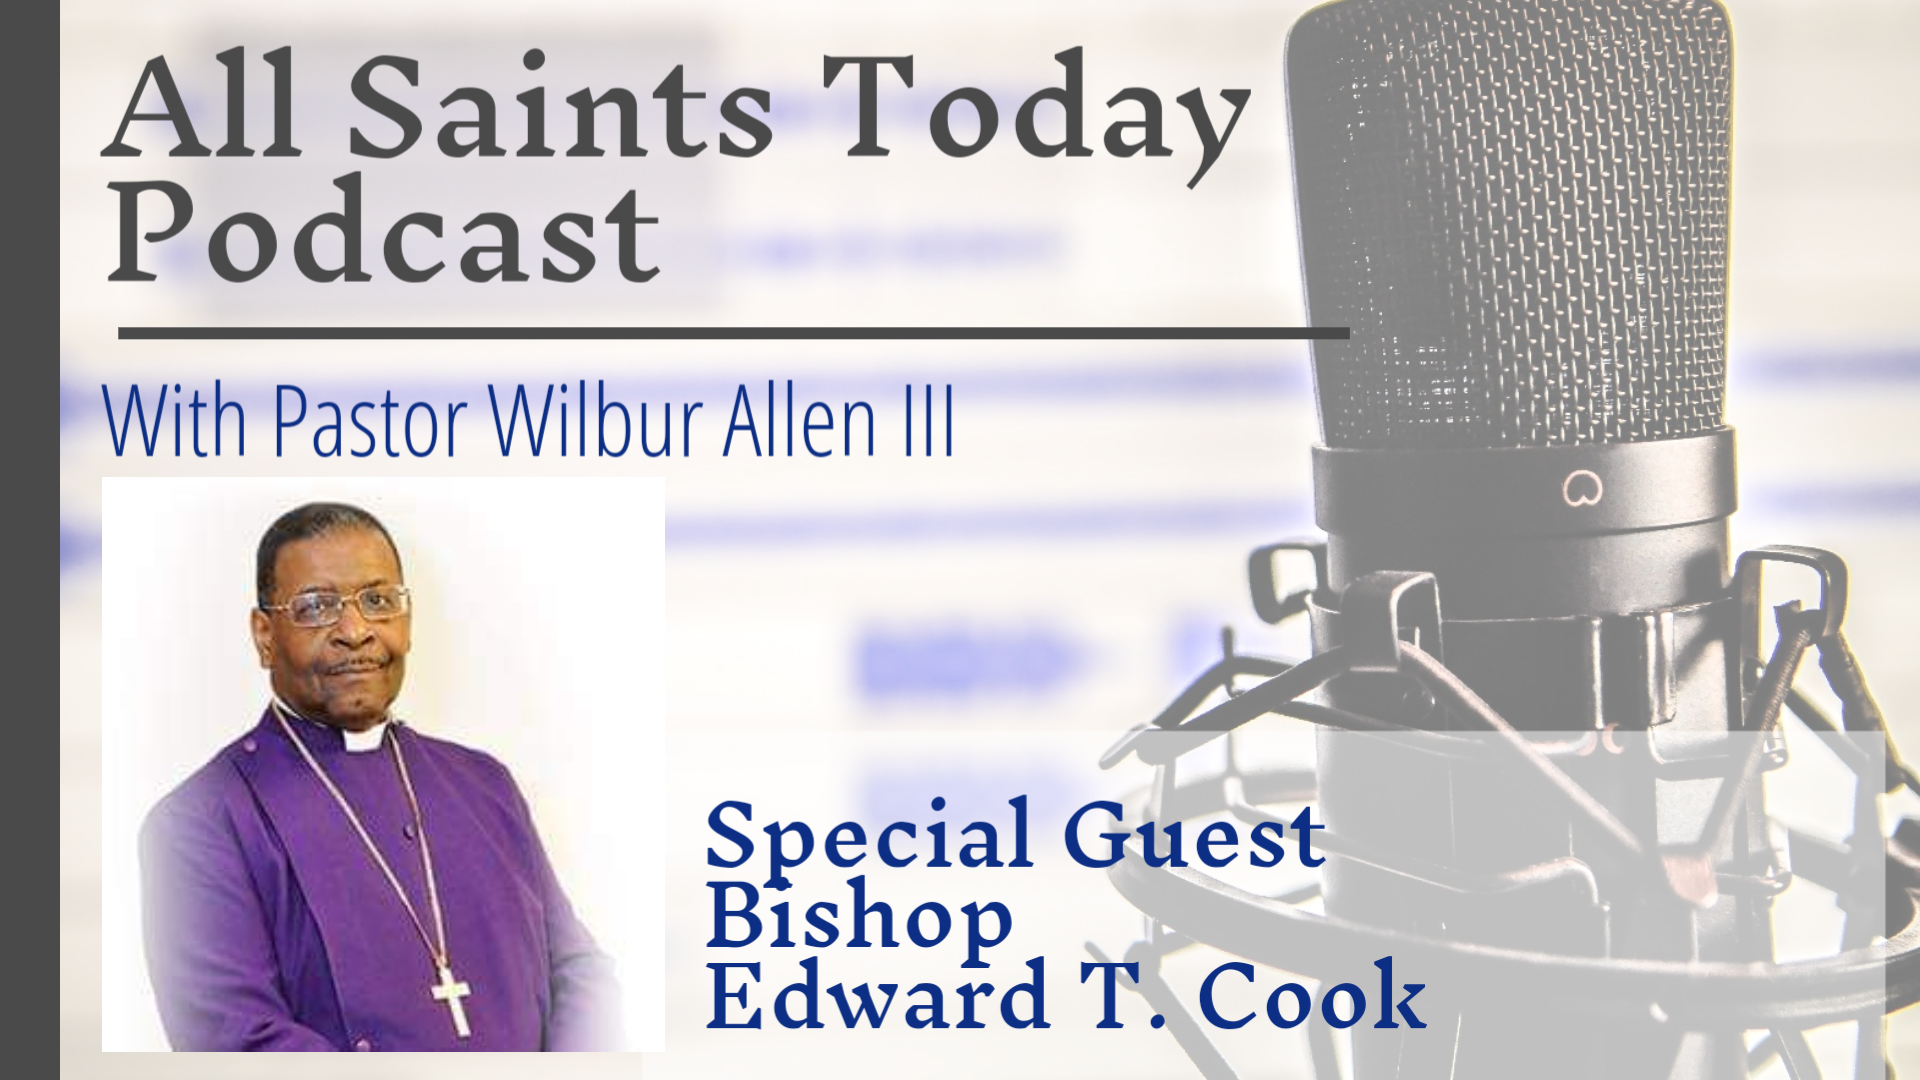 All Saints Today Podcast - Special Guest: Bishop Edward T. Cook